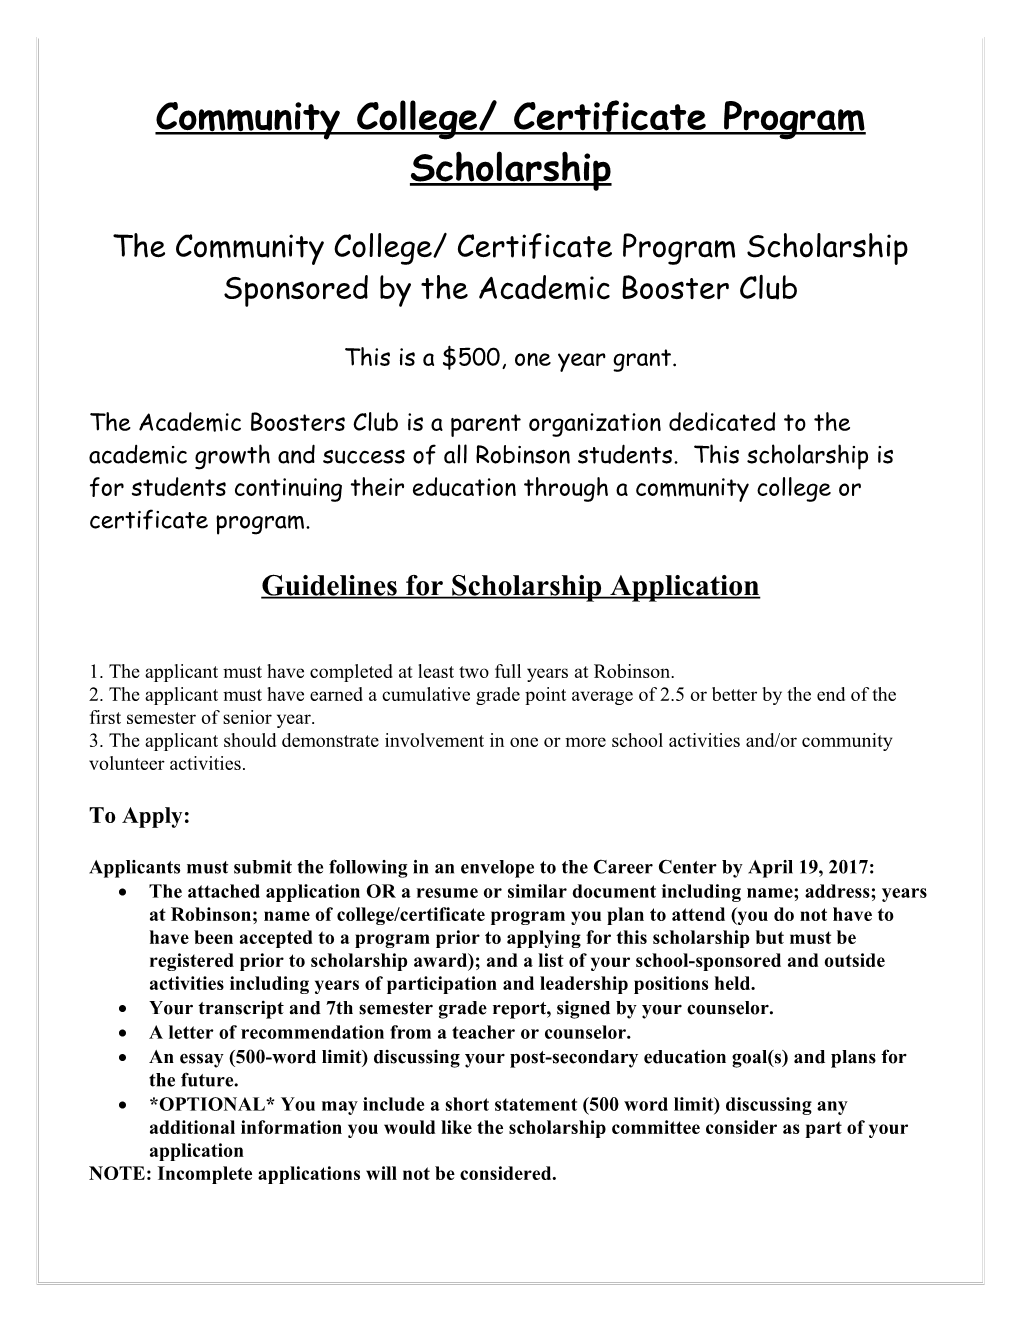 Excellence in Academics Scholarship